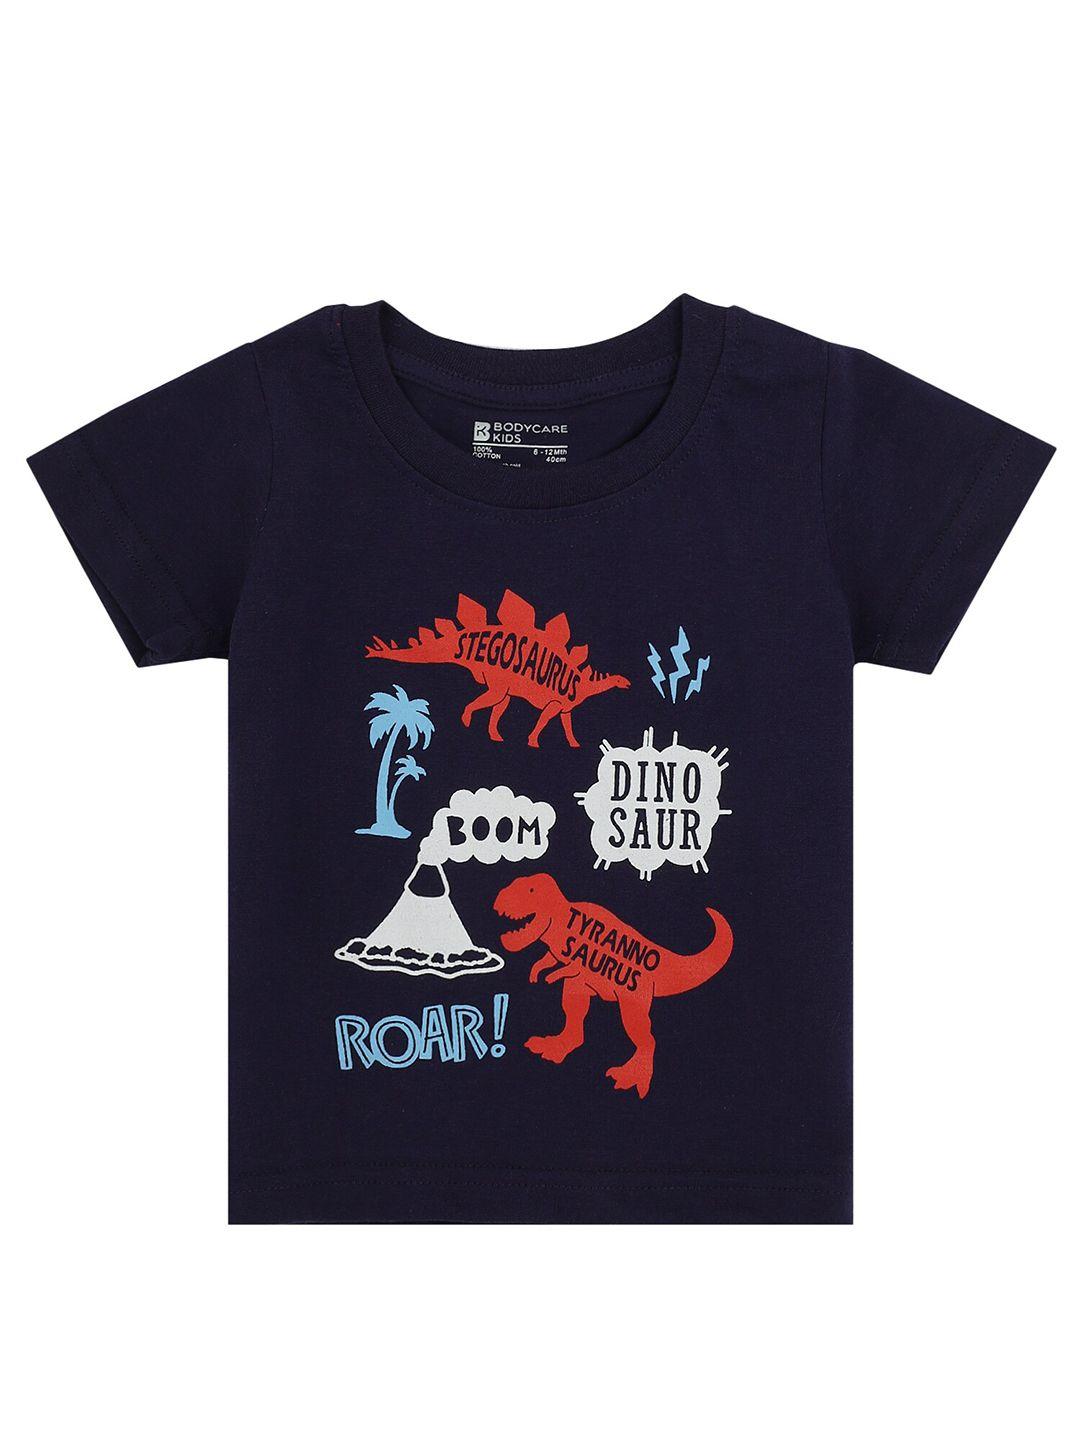 bodycare boys navy blue & red printed t-shirt with shorts